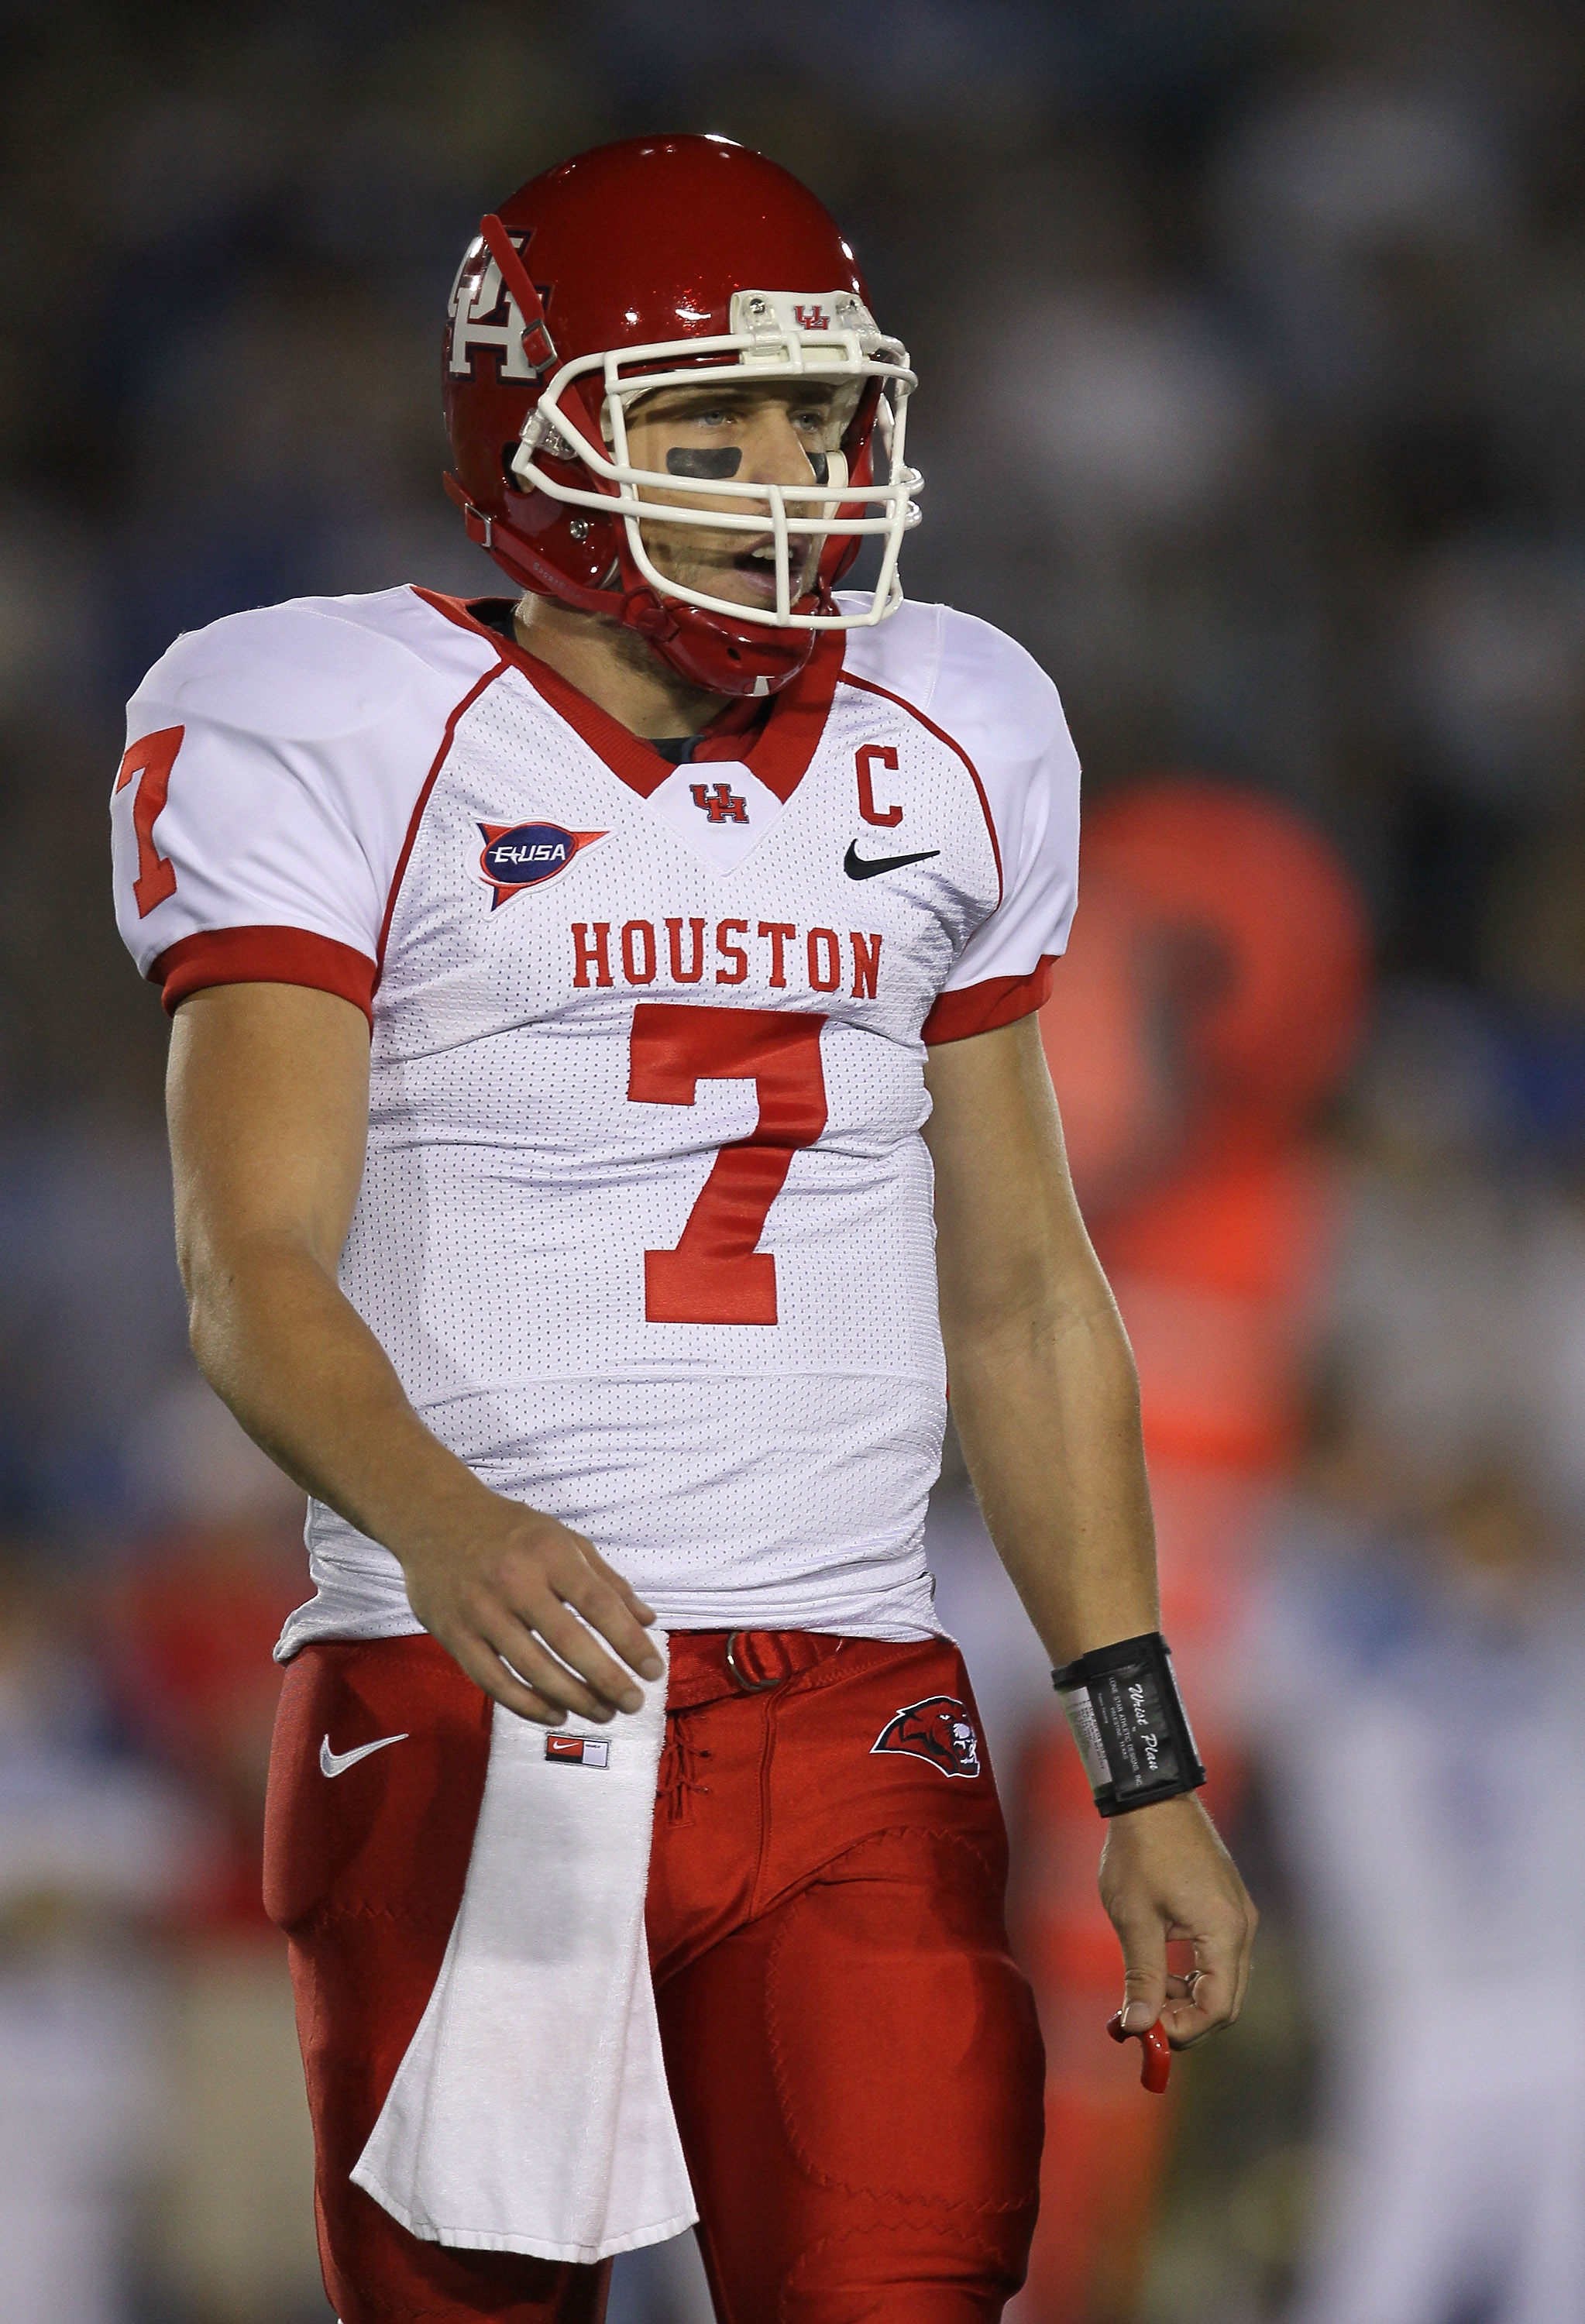 PASADENA, CA - SEPTEMBER 18:  Quarterback Case Keenum #7 of the Houston Cougars at the game against the UCLA Bruins in the second quarter at the Rose Bowl on September 18, 2010 in Pasadena, California.  UCLA won 31-13.  (Photo by Stephen Dunn/Getty Images